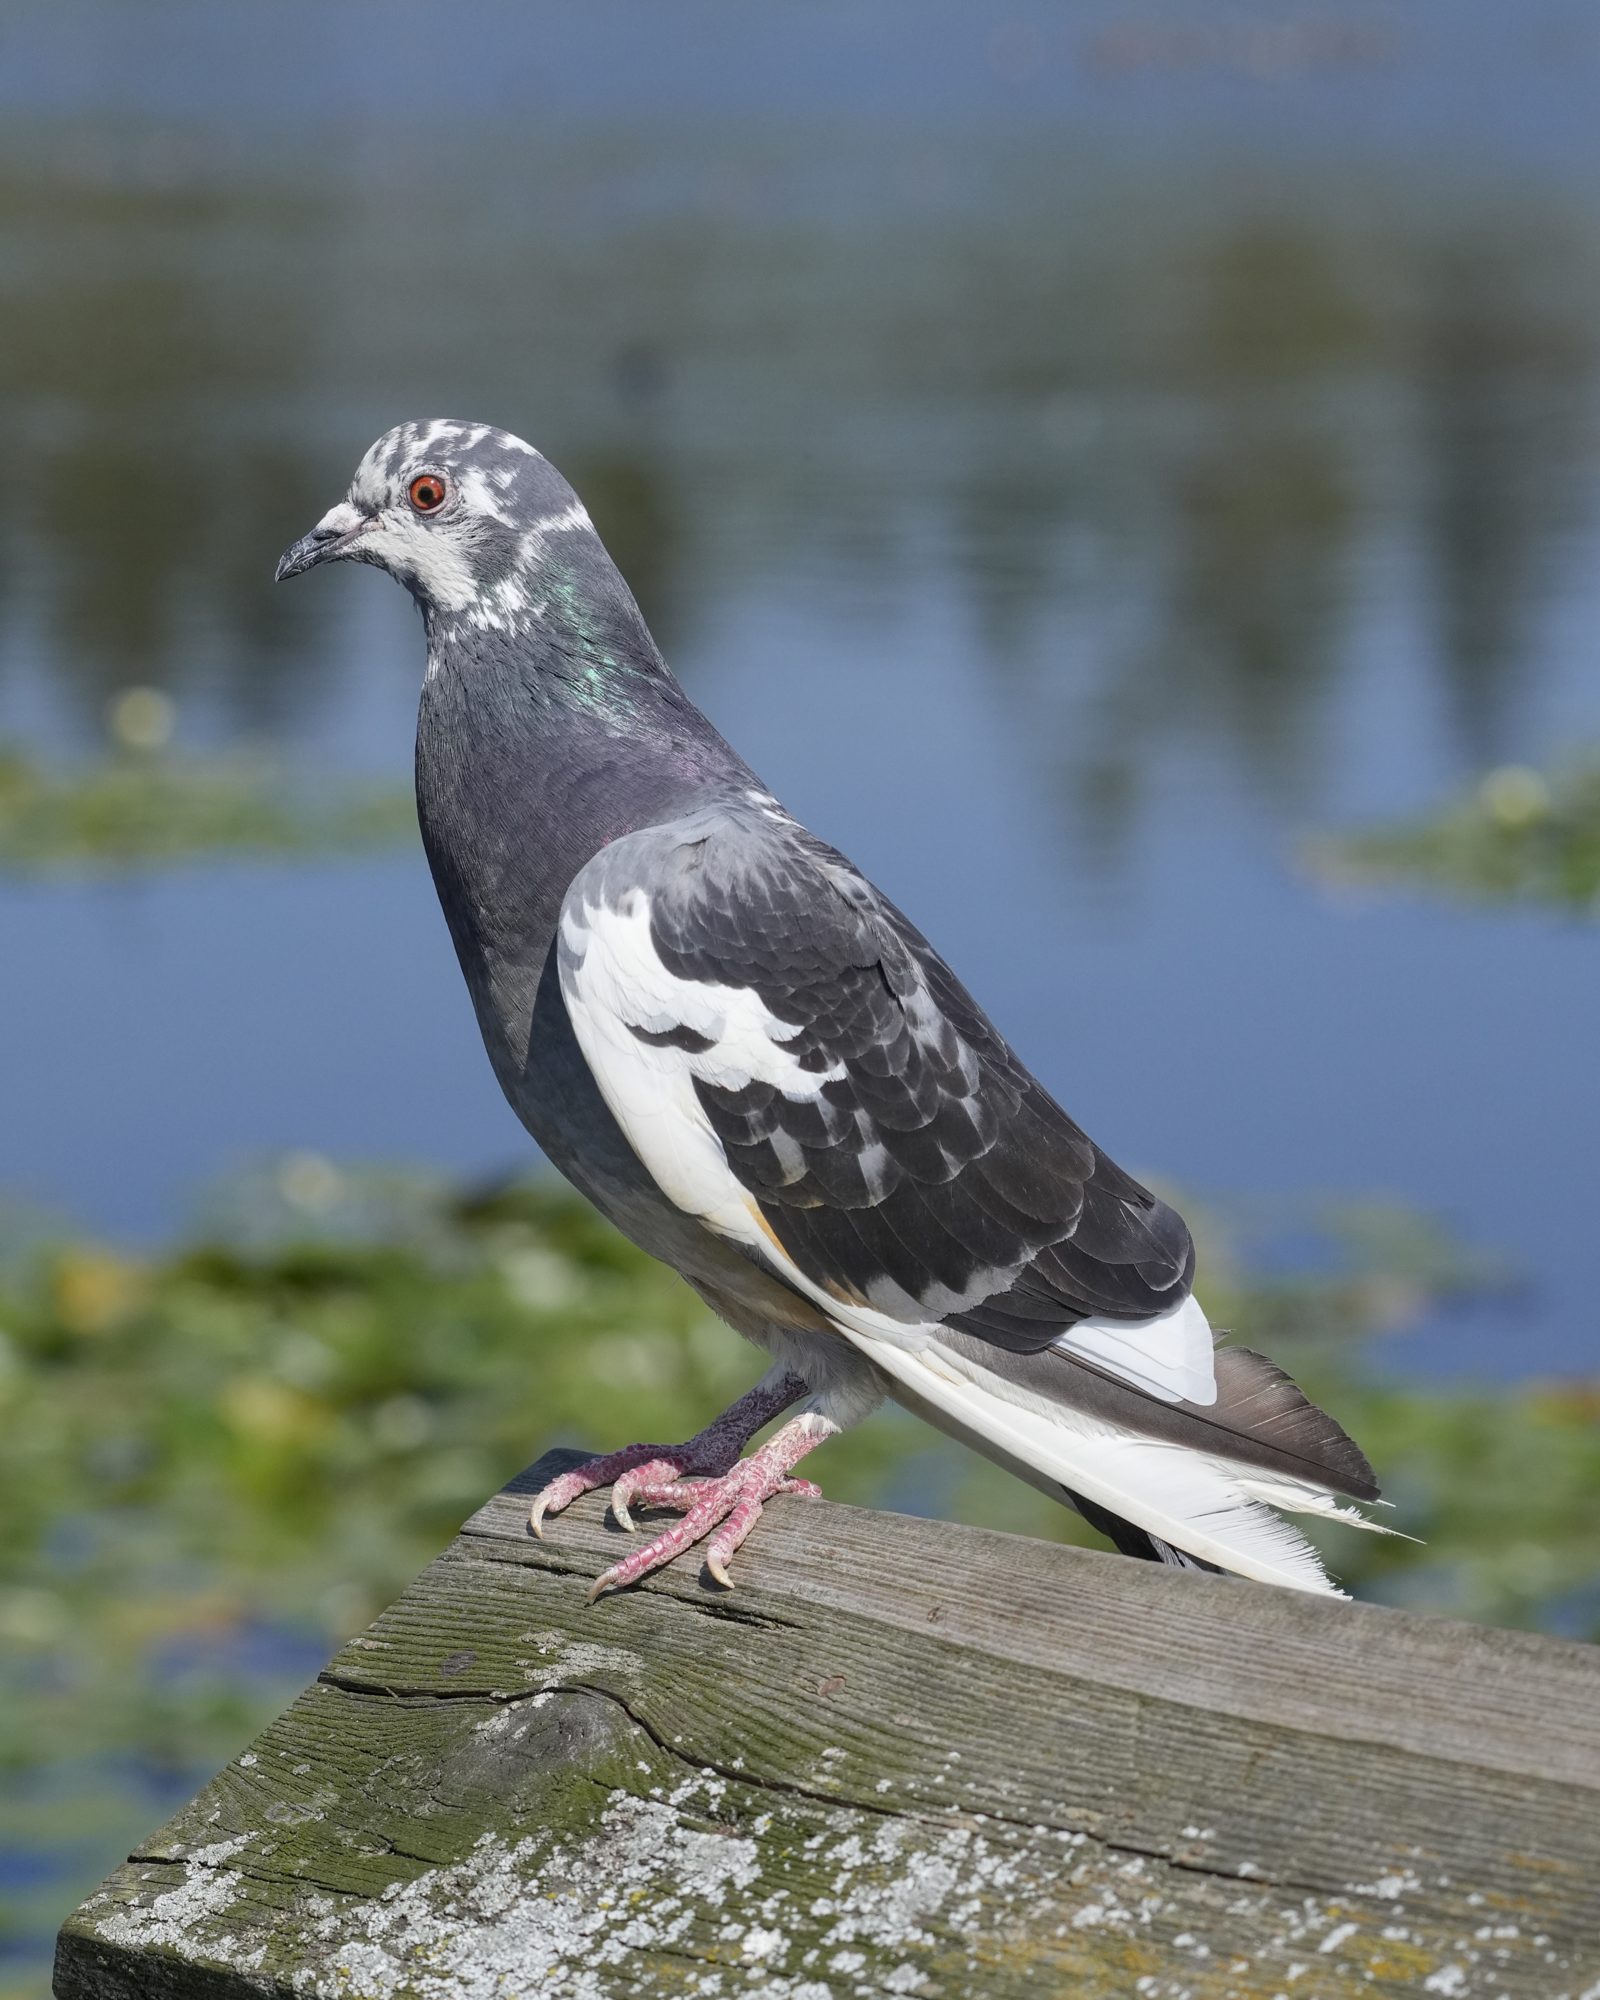 A Rock Pigeon with unusual white markings on its face and wings, is standing on a wooden fence with the lake in the background